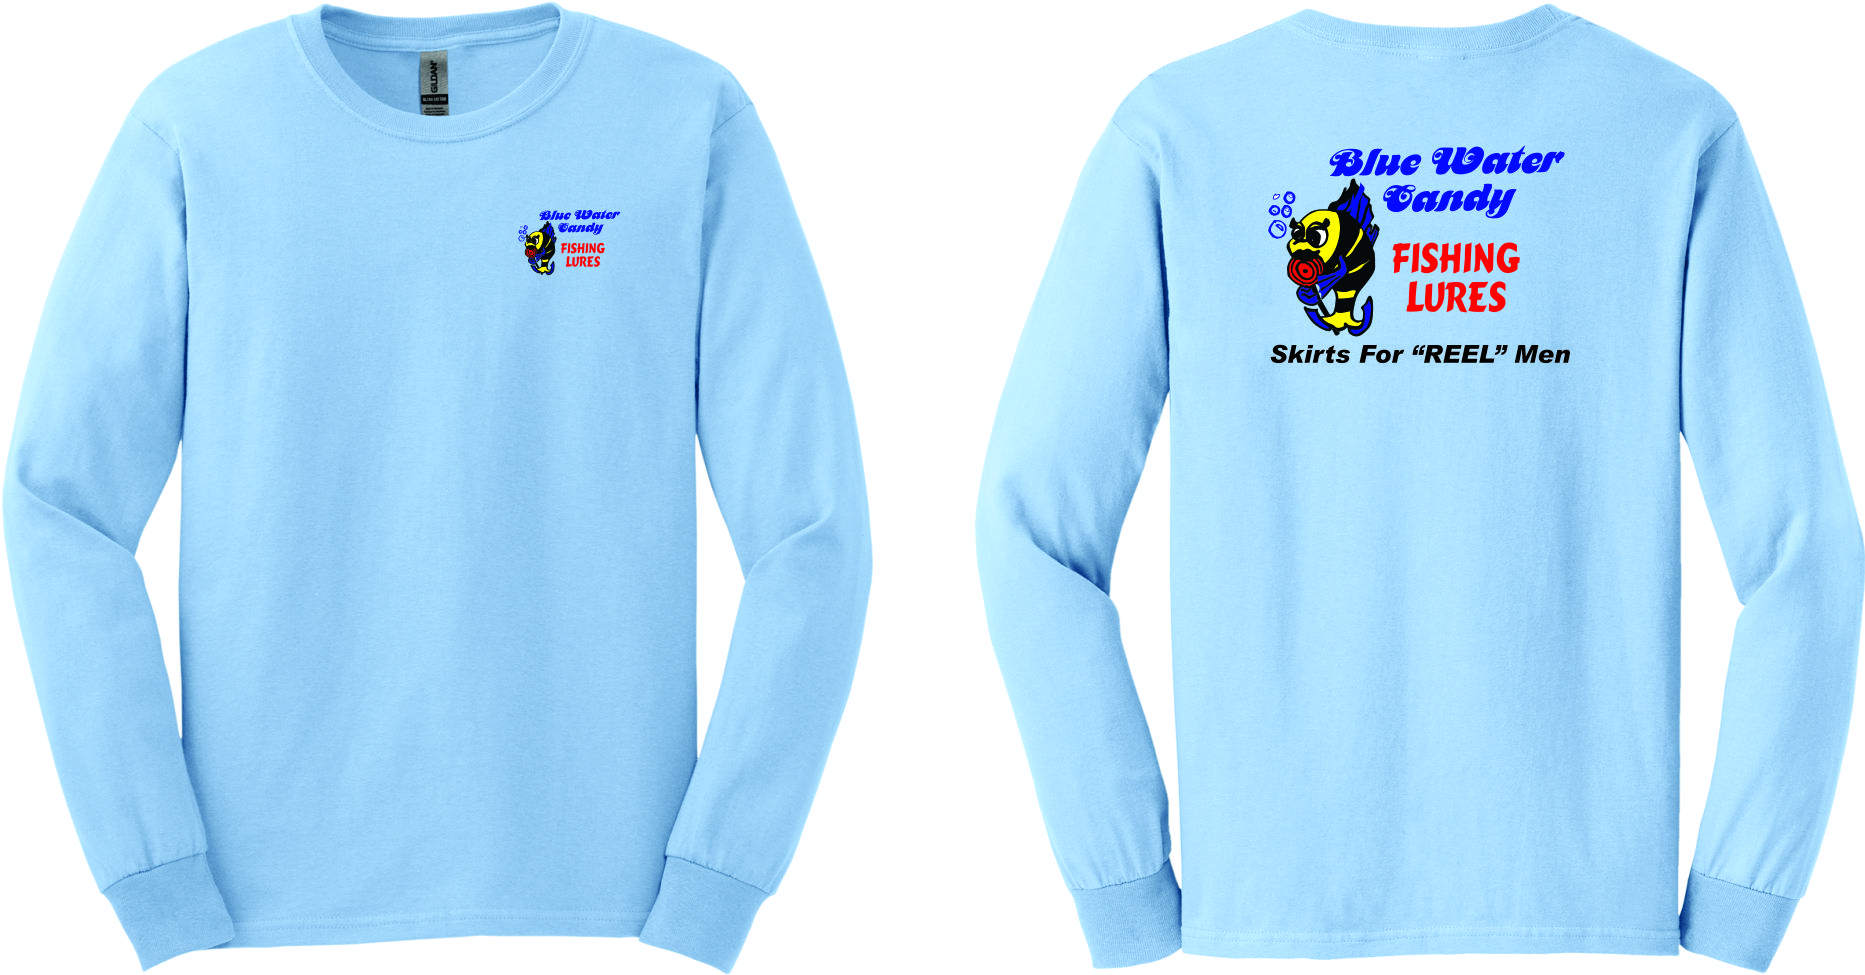 Classic Logo T-Shirt Long Sleeve - Blue Water Candy Lures